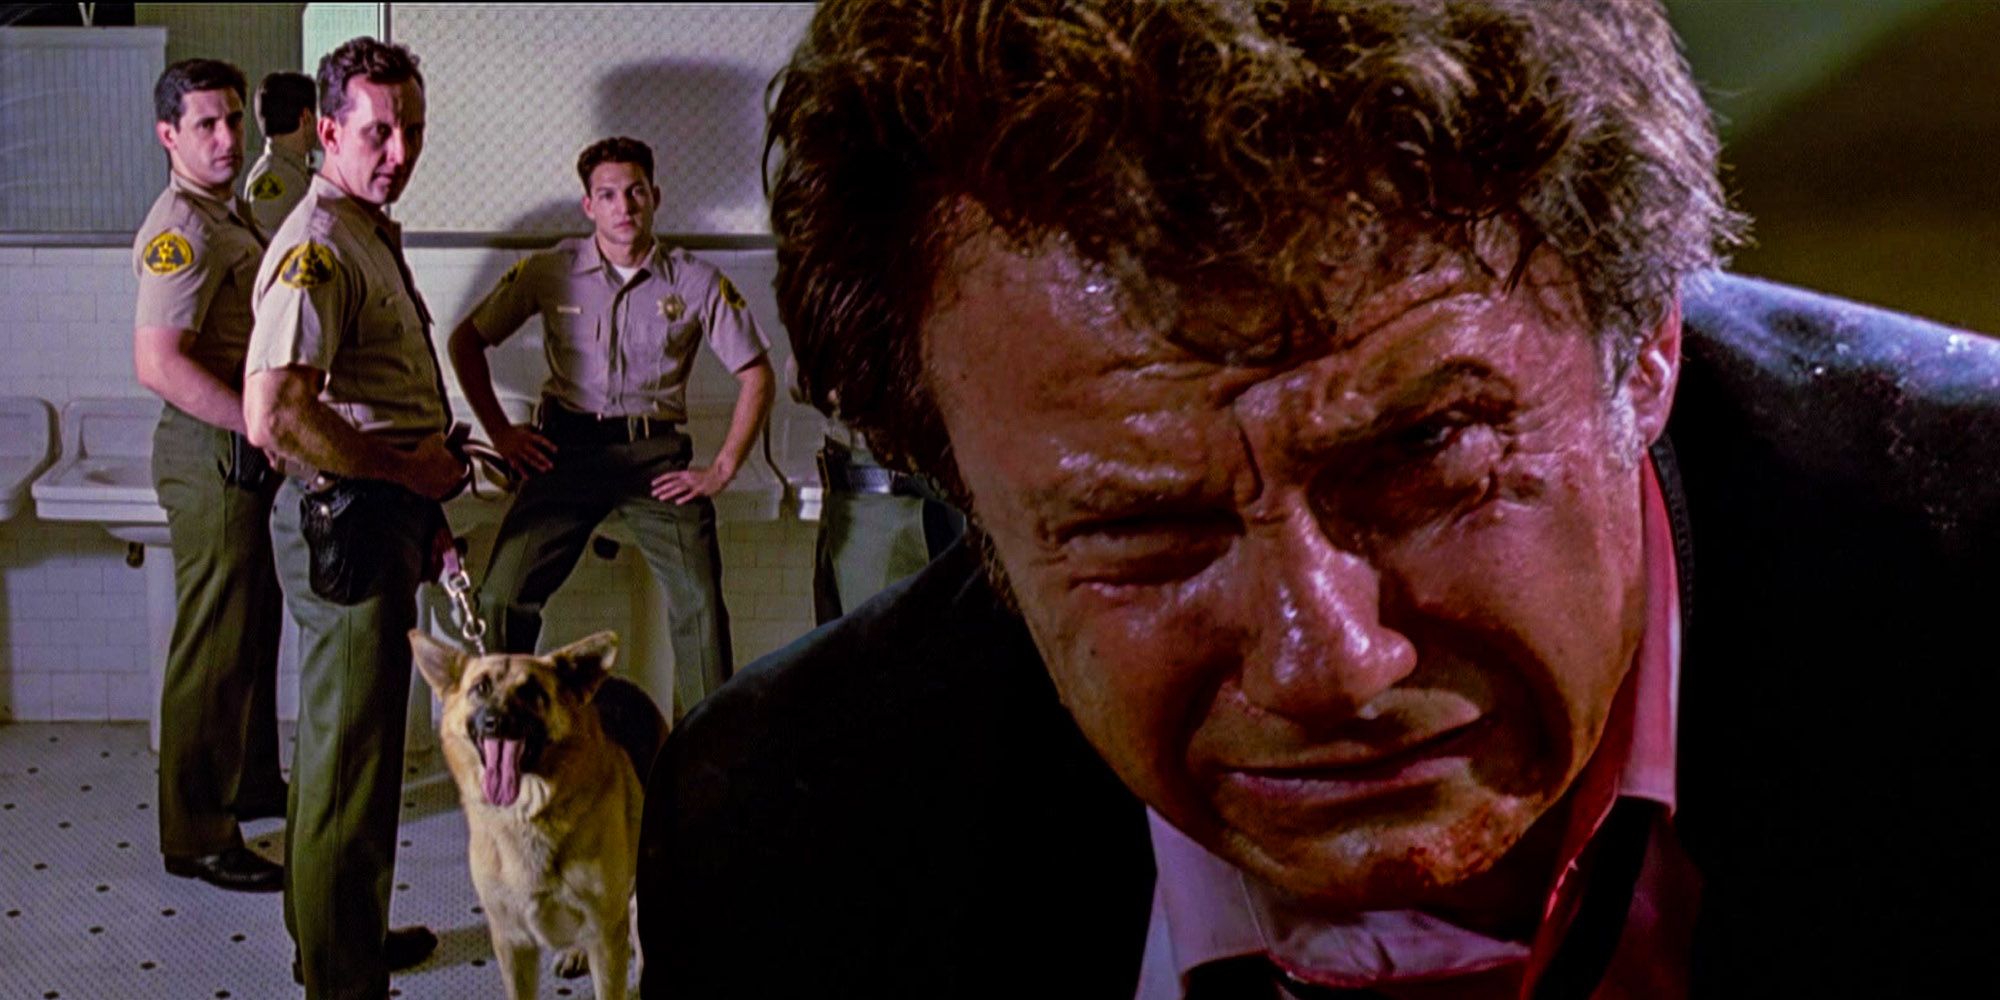 Reservoir Dogs Ending Explained: What Happened To Mr. Pink?